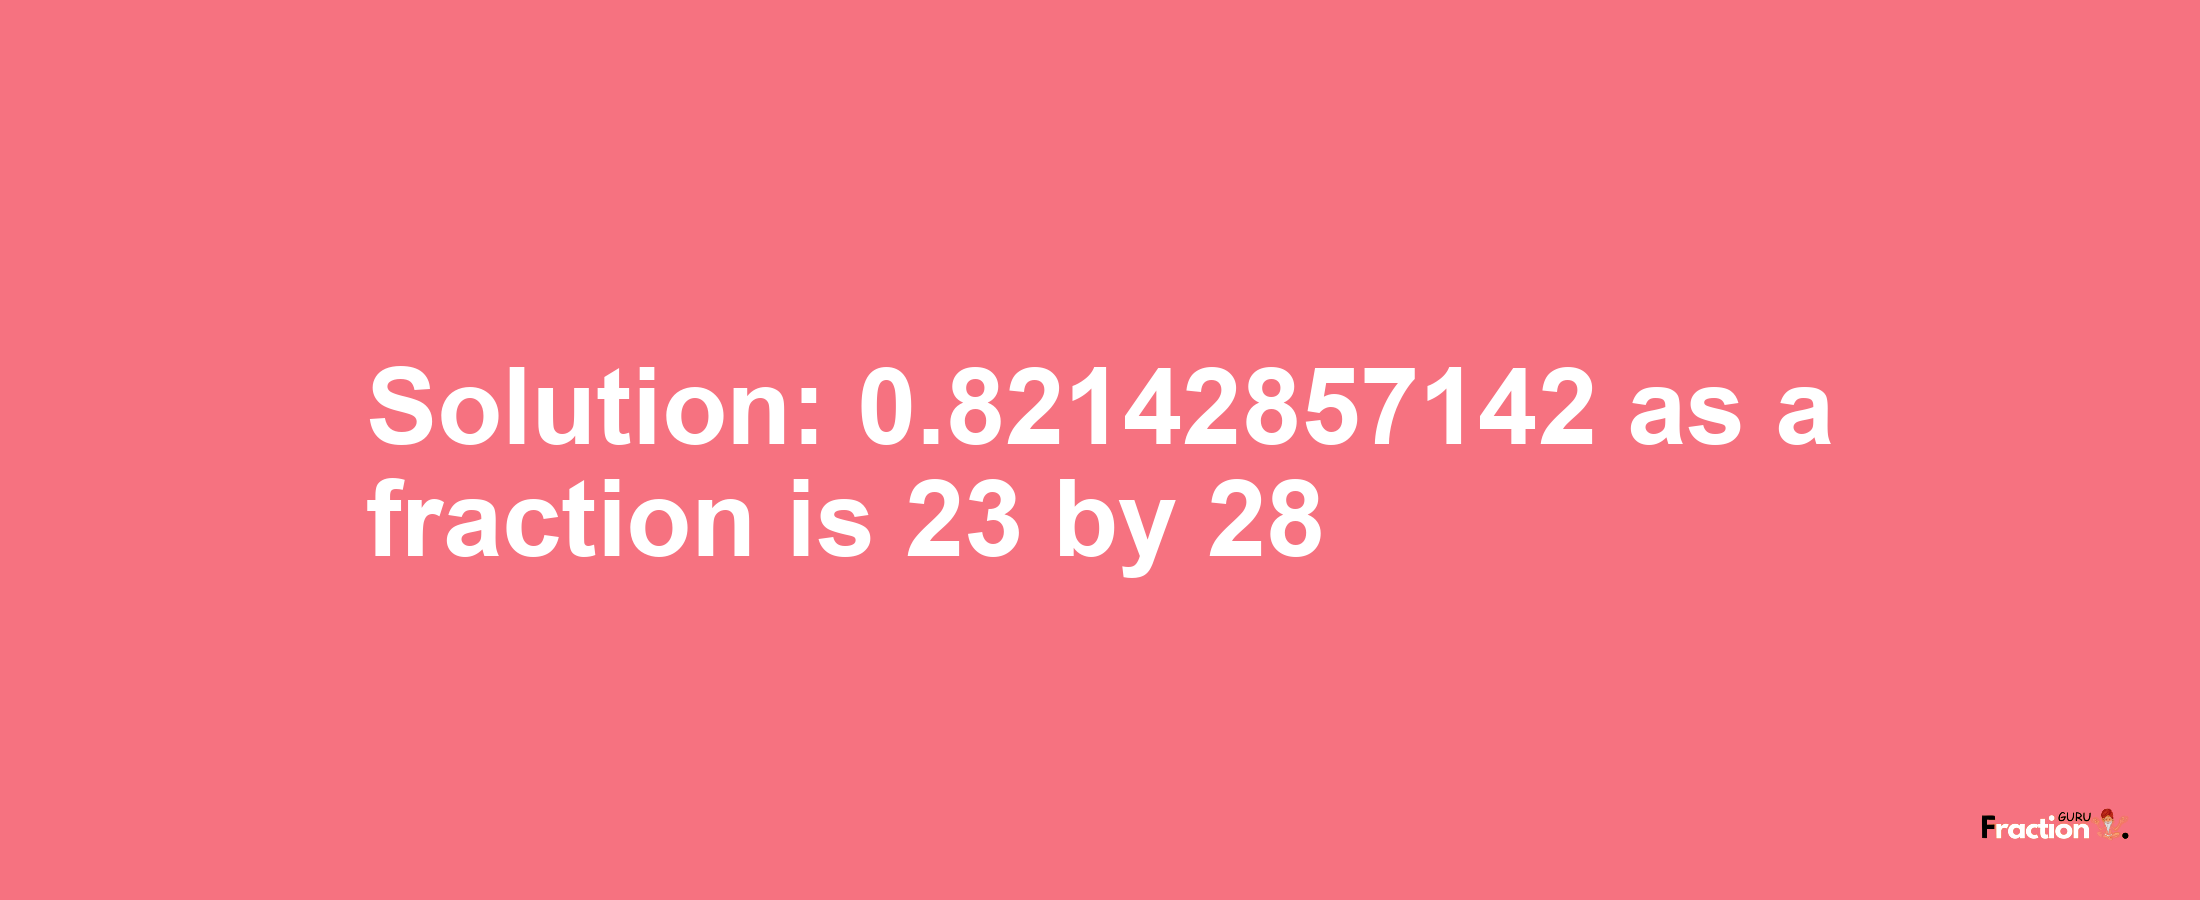 Solution:0.82142857142 as a fraction is 23/28